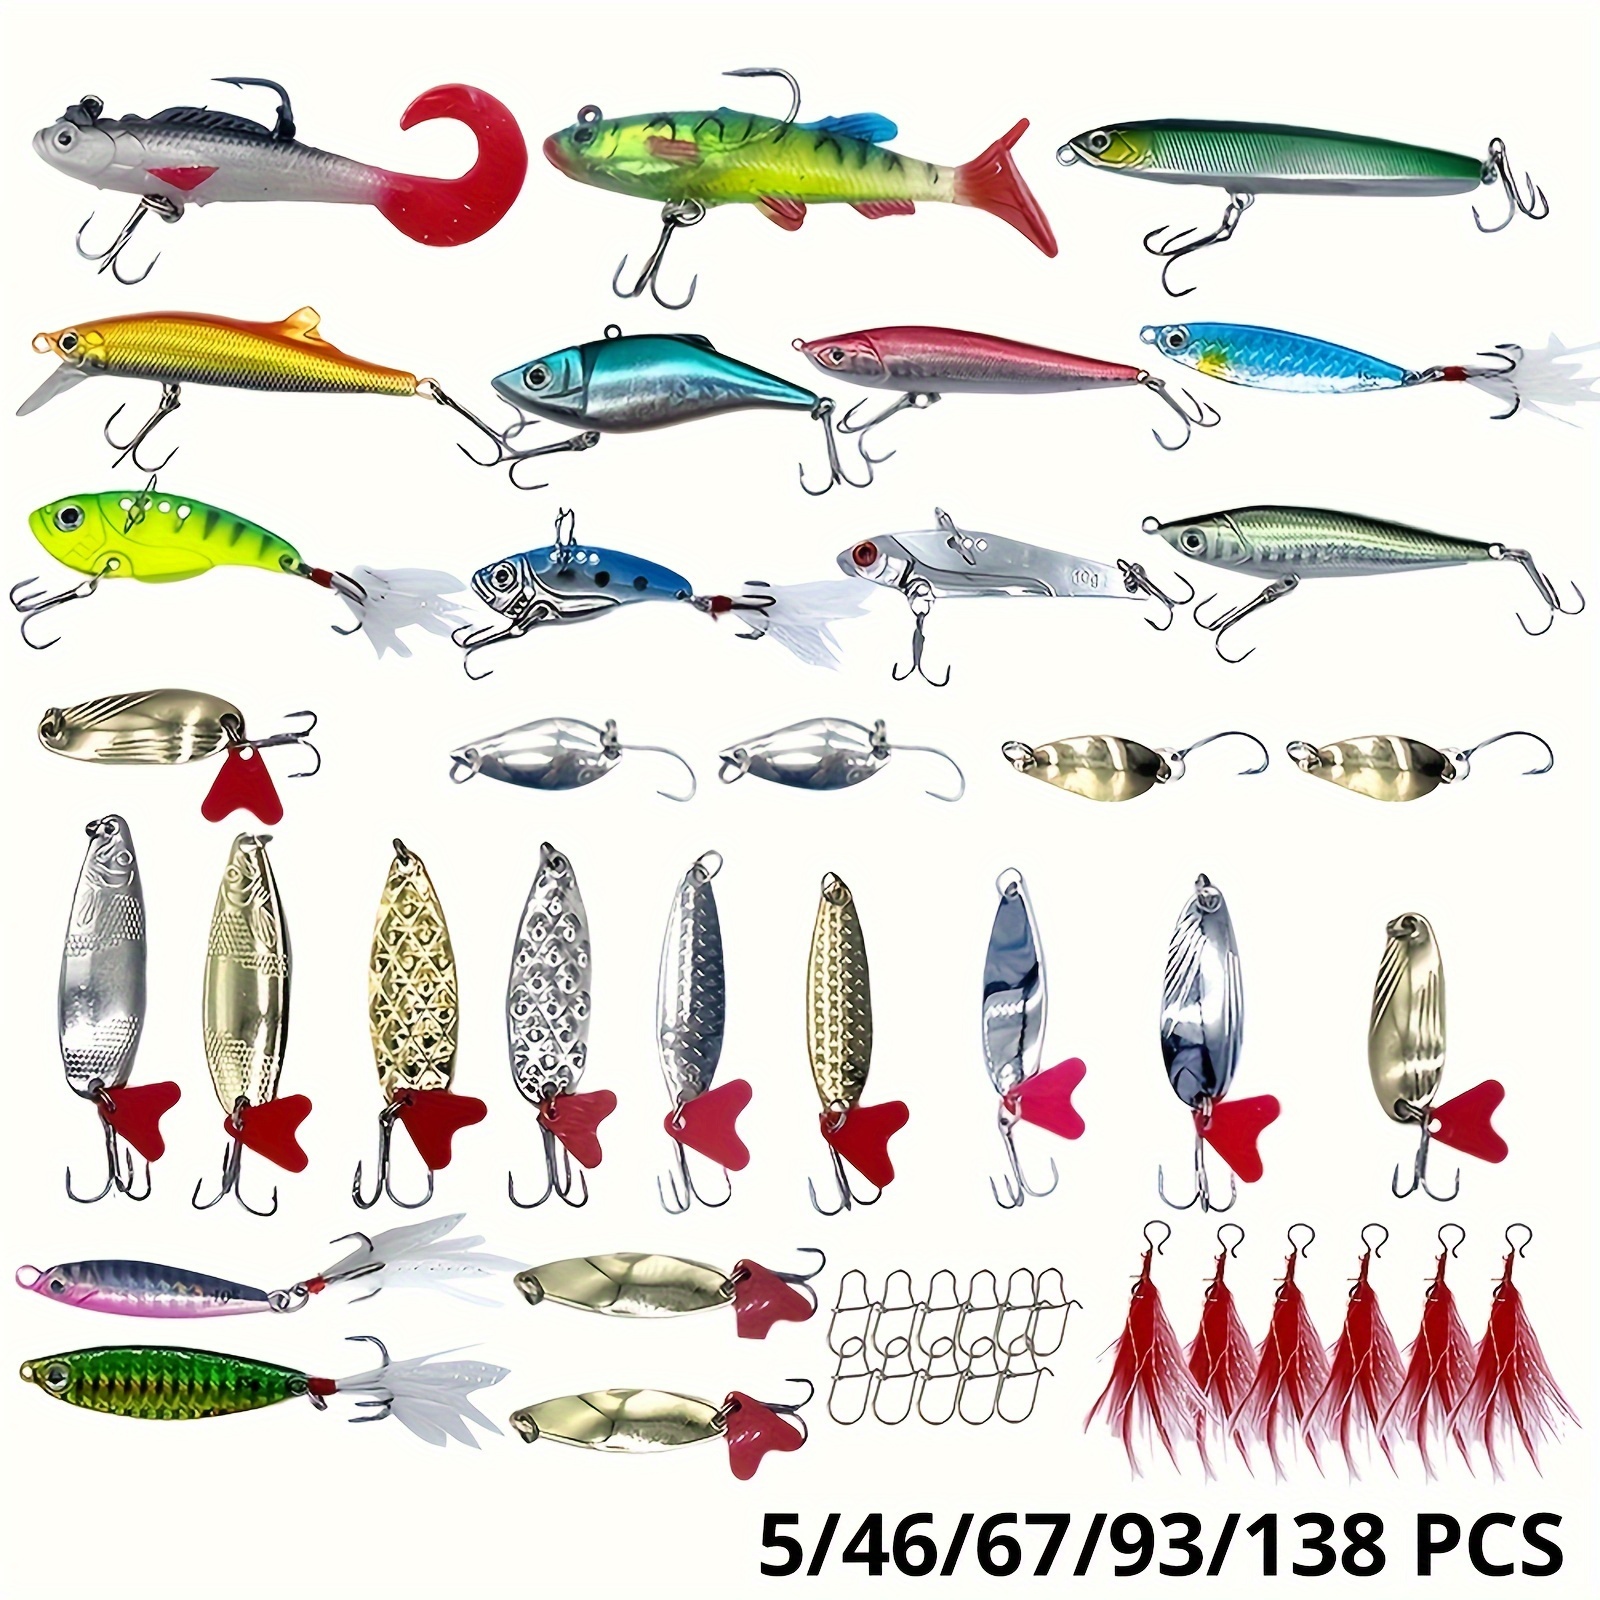 5-Piece Metal Fishing Lure Set: Spinners, Baits & Kits for Combo Lures,  Bass, Trout & Salmon - Box Included!